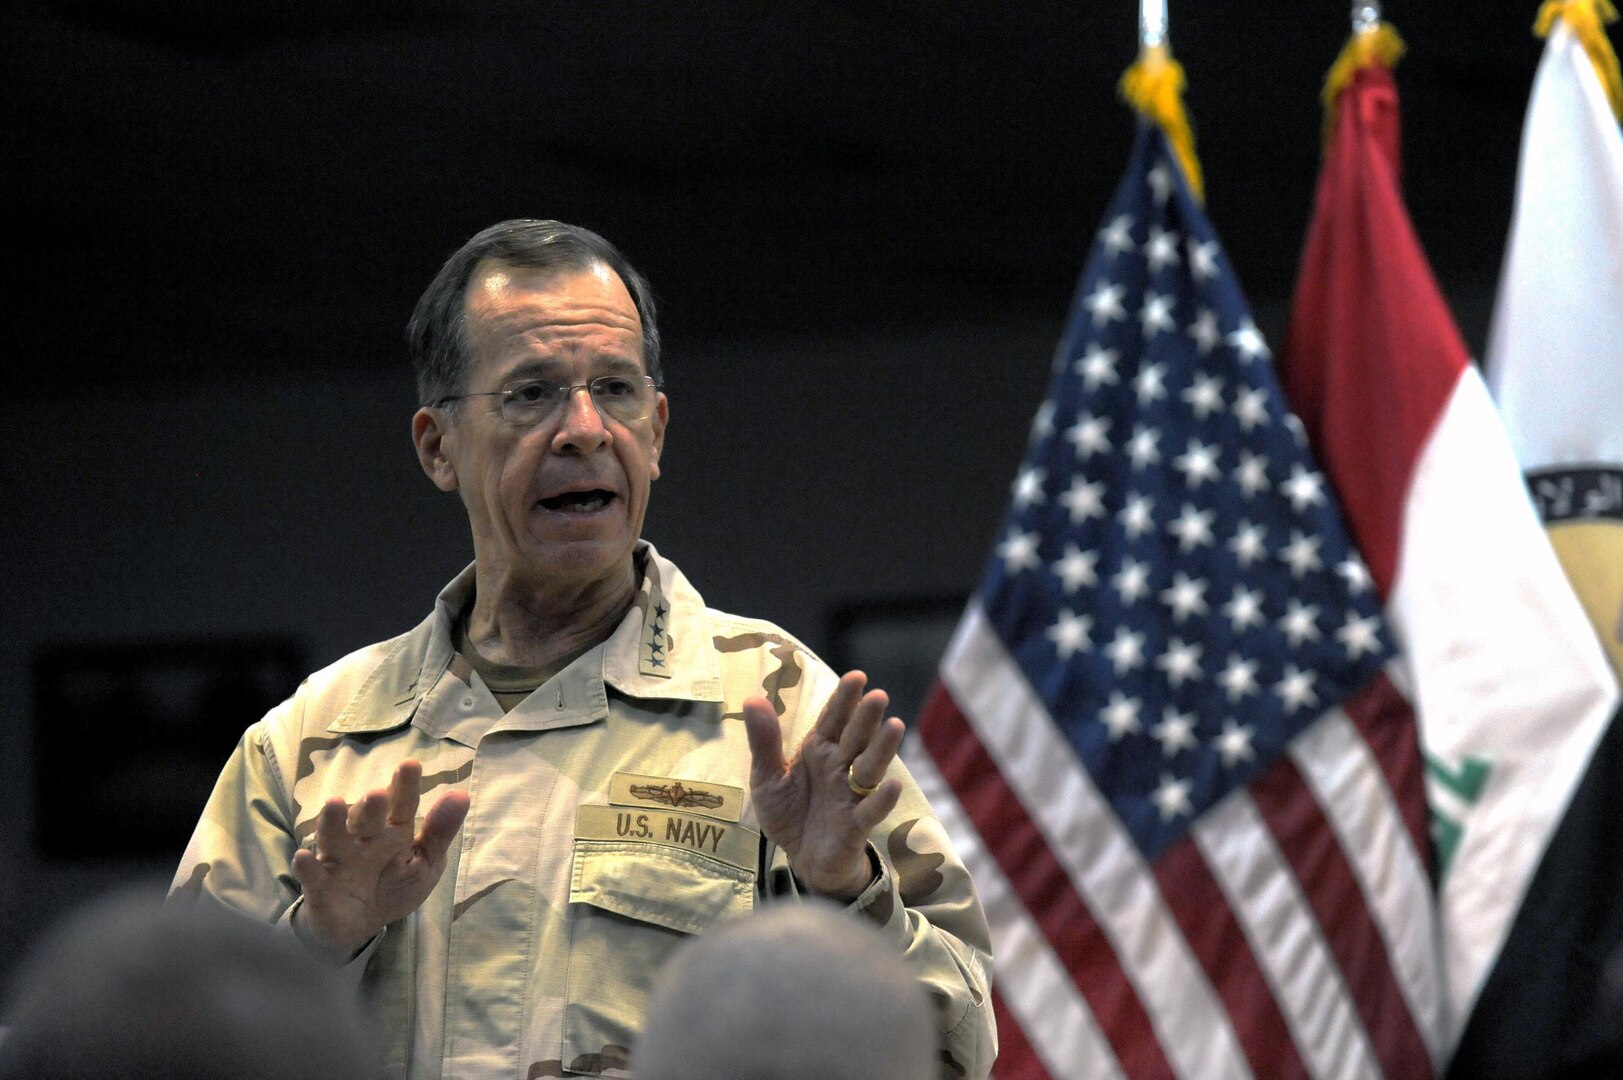 Adm. Mike Mullen, chairman of the Joint Chiefs of Staff, addresses service members assigned to United States Division-Center during a visit to Camp Liberty, Iraq, Friday, April 22, 2011. Mullen spoke with the troops about the drawdown in Iraq, what future deployment timeframes may look like and the continued role of the Guard and Reserve in those deployments.